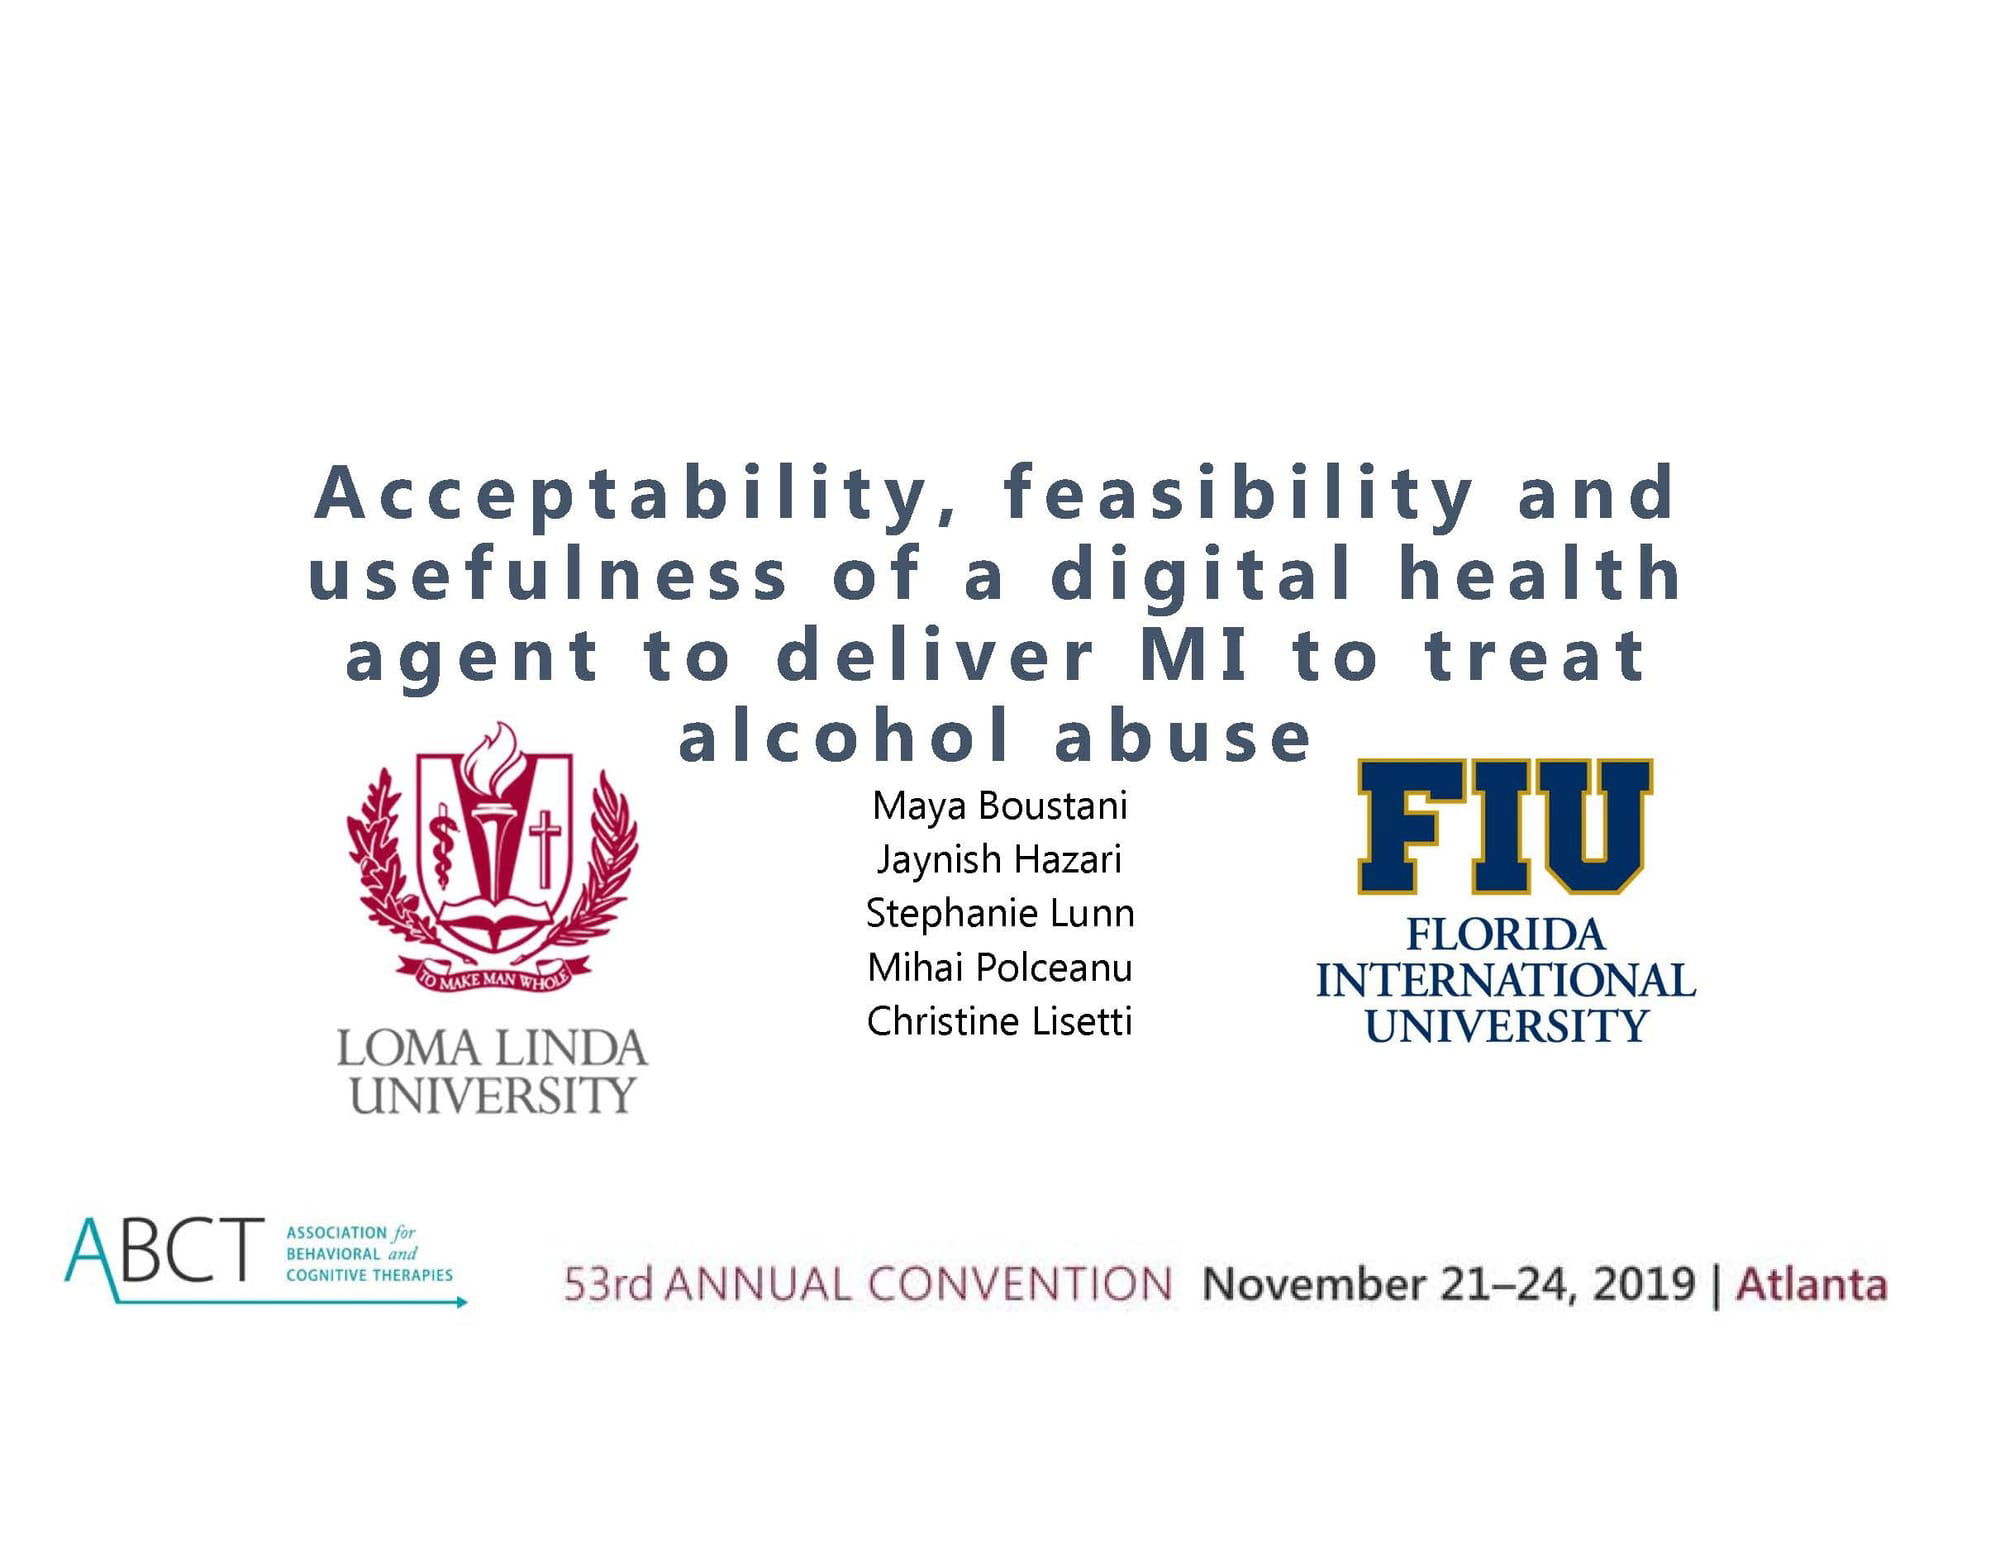 Acceptability, feasibility, and usefulness of using a digital health agent to deliver MI to treat alcohol abuse: Clinician perspectives